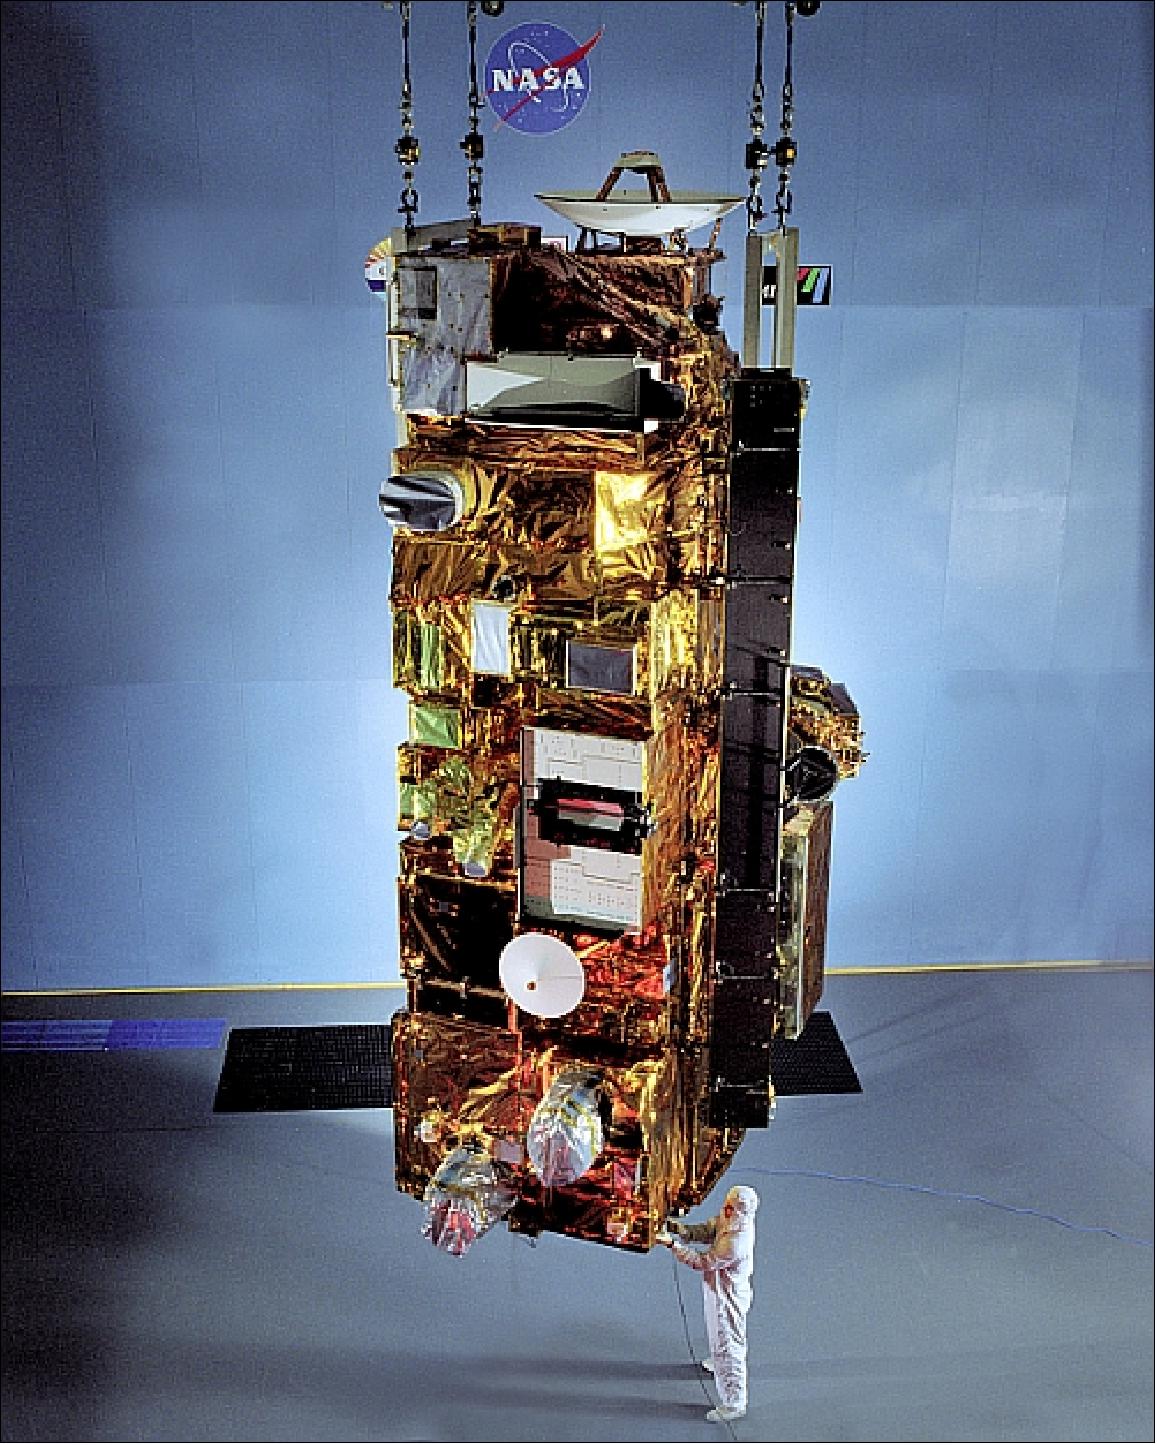 Figure 4: The Terra spacecraft in the cleanroom of LMMS at Valley Forge (image credit: LMMS)